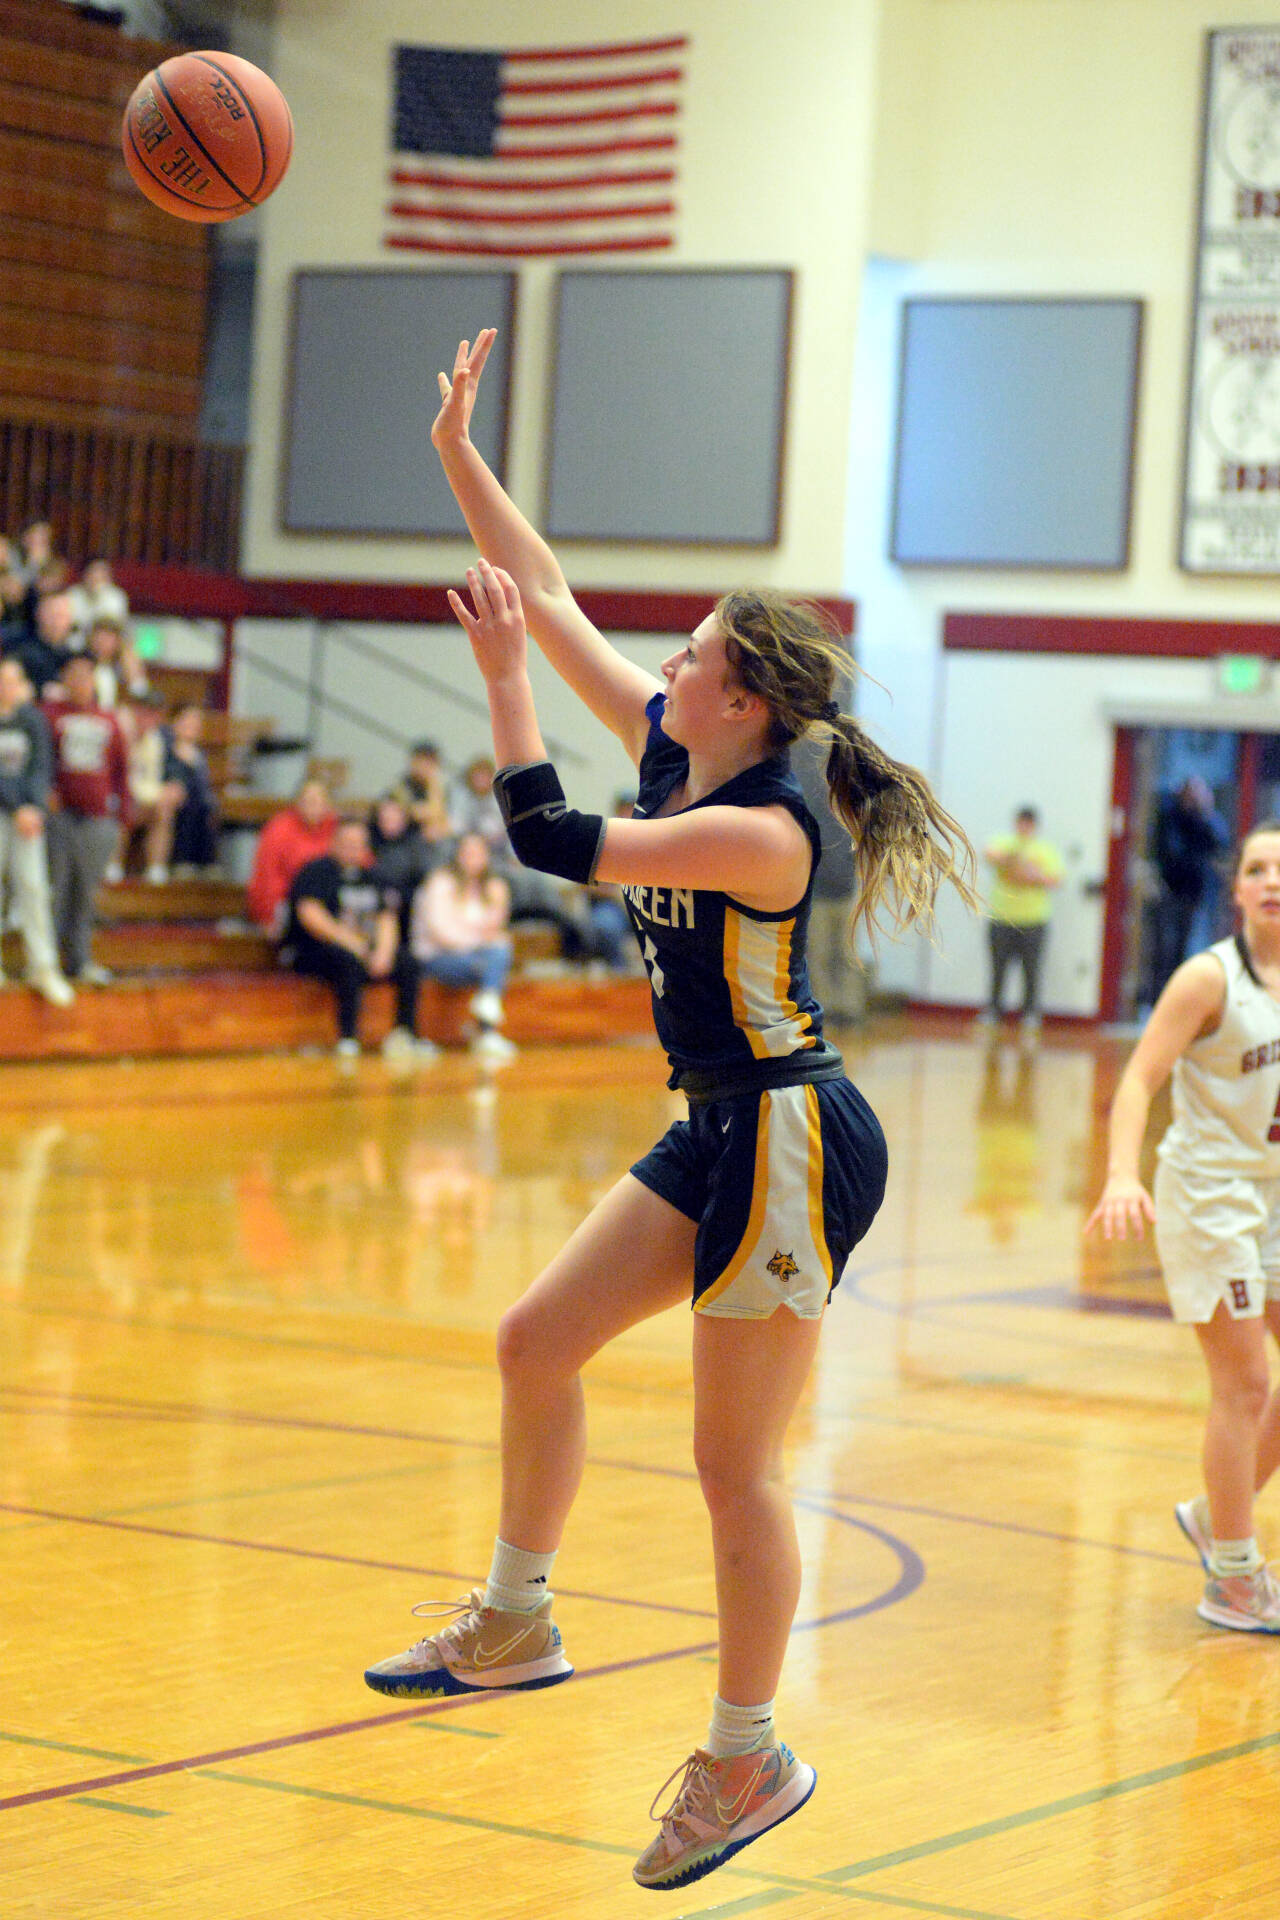 RYAN SPARKS | THE DAILY WORLD Aberdeen’s Zoe Troeh scores on a running jump shot during the Bobcats’ 52-44 win on Thursday in Hoquiam.